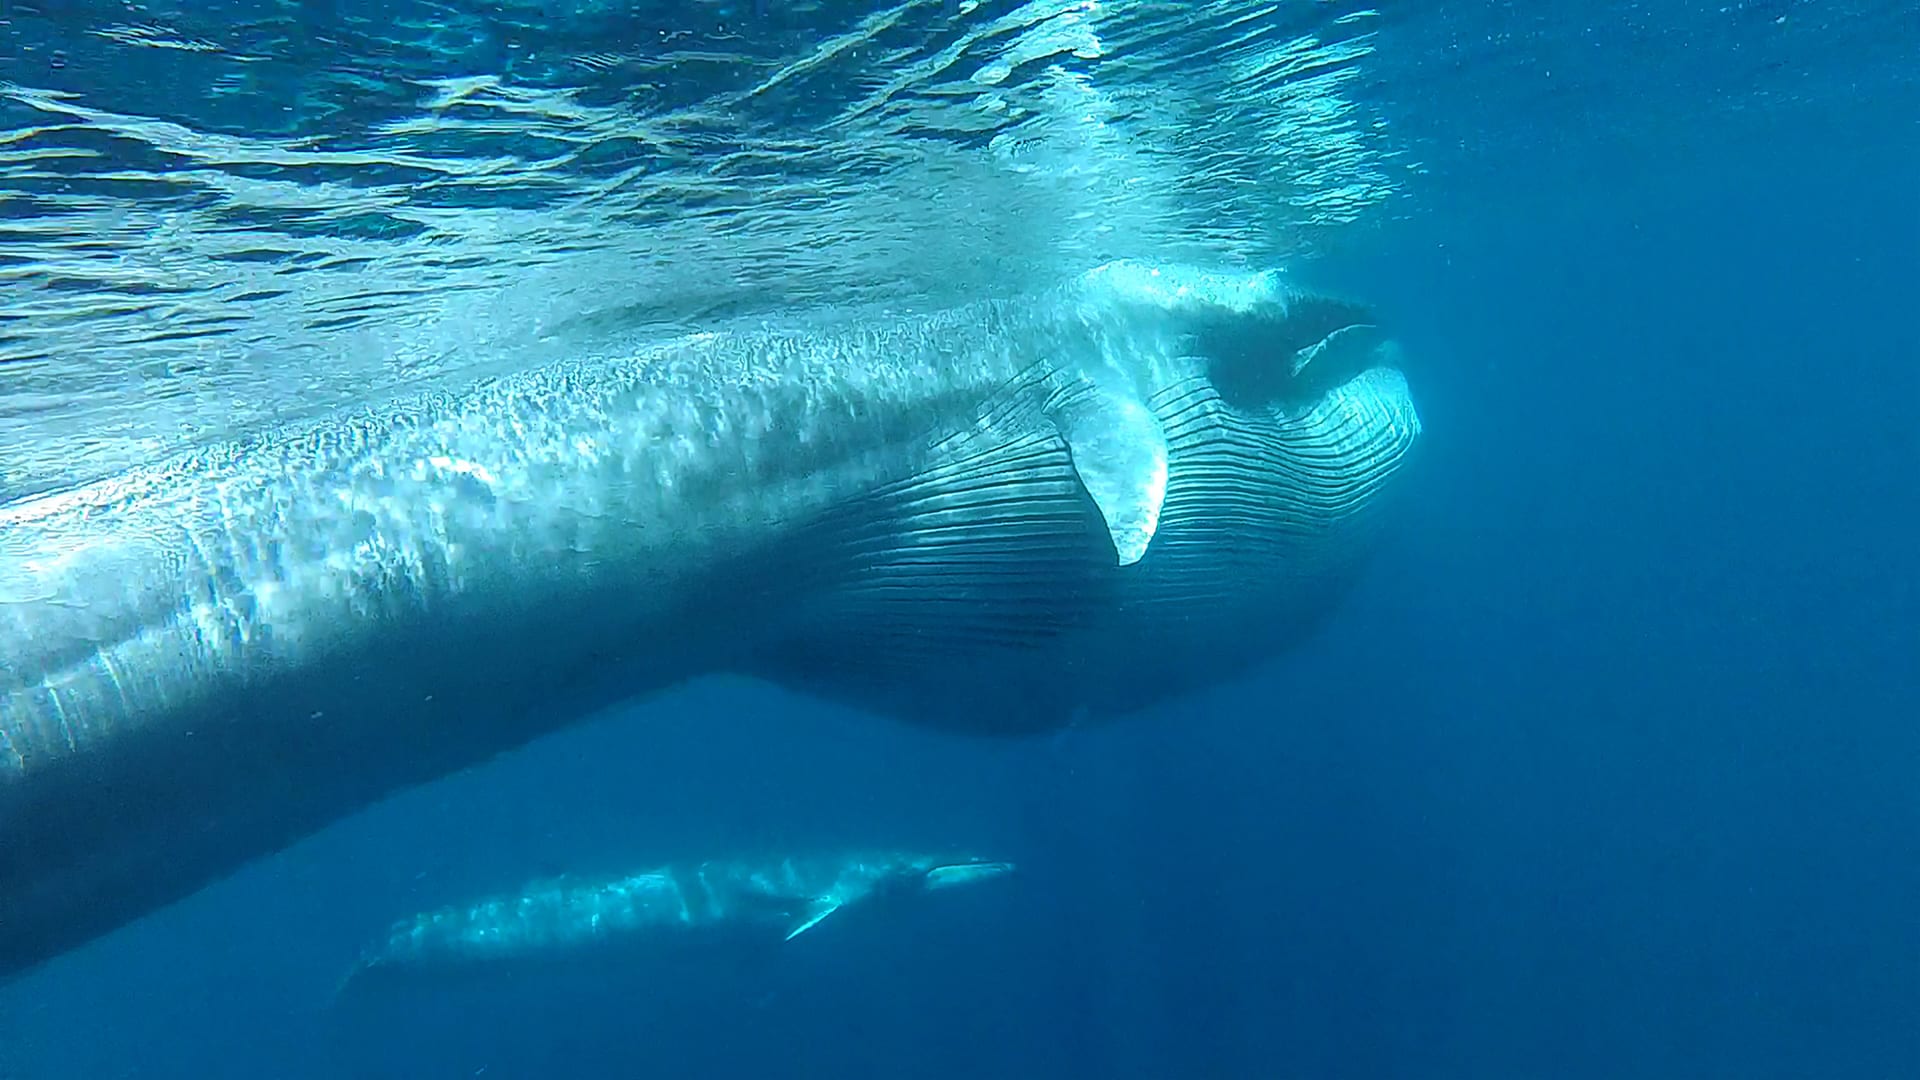 A New Whale Species Is Discovered in the Wild